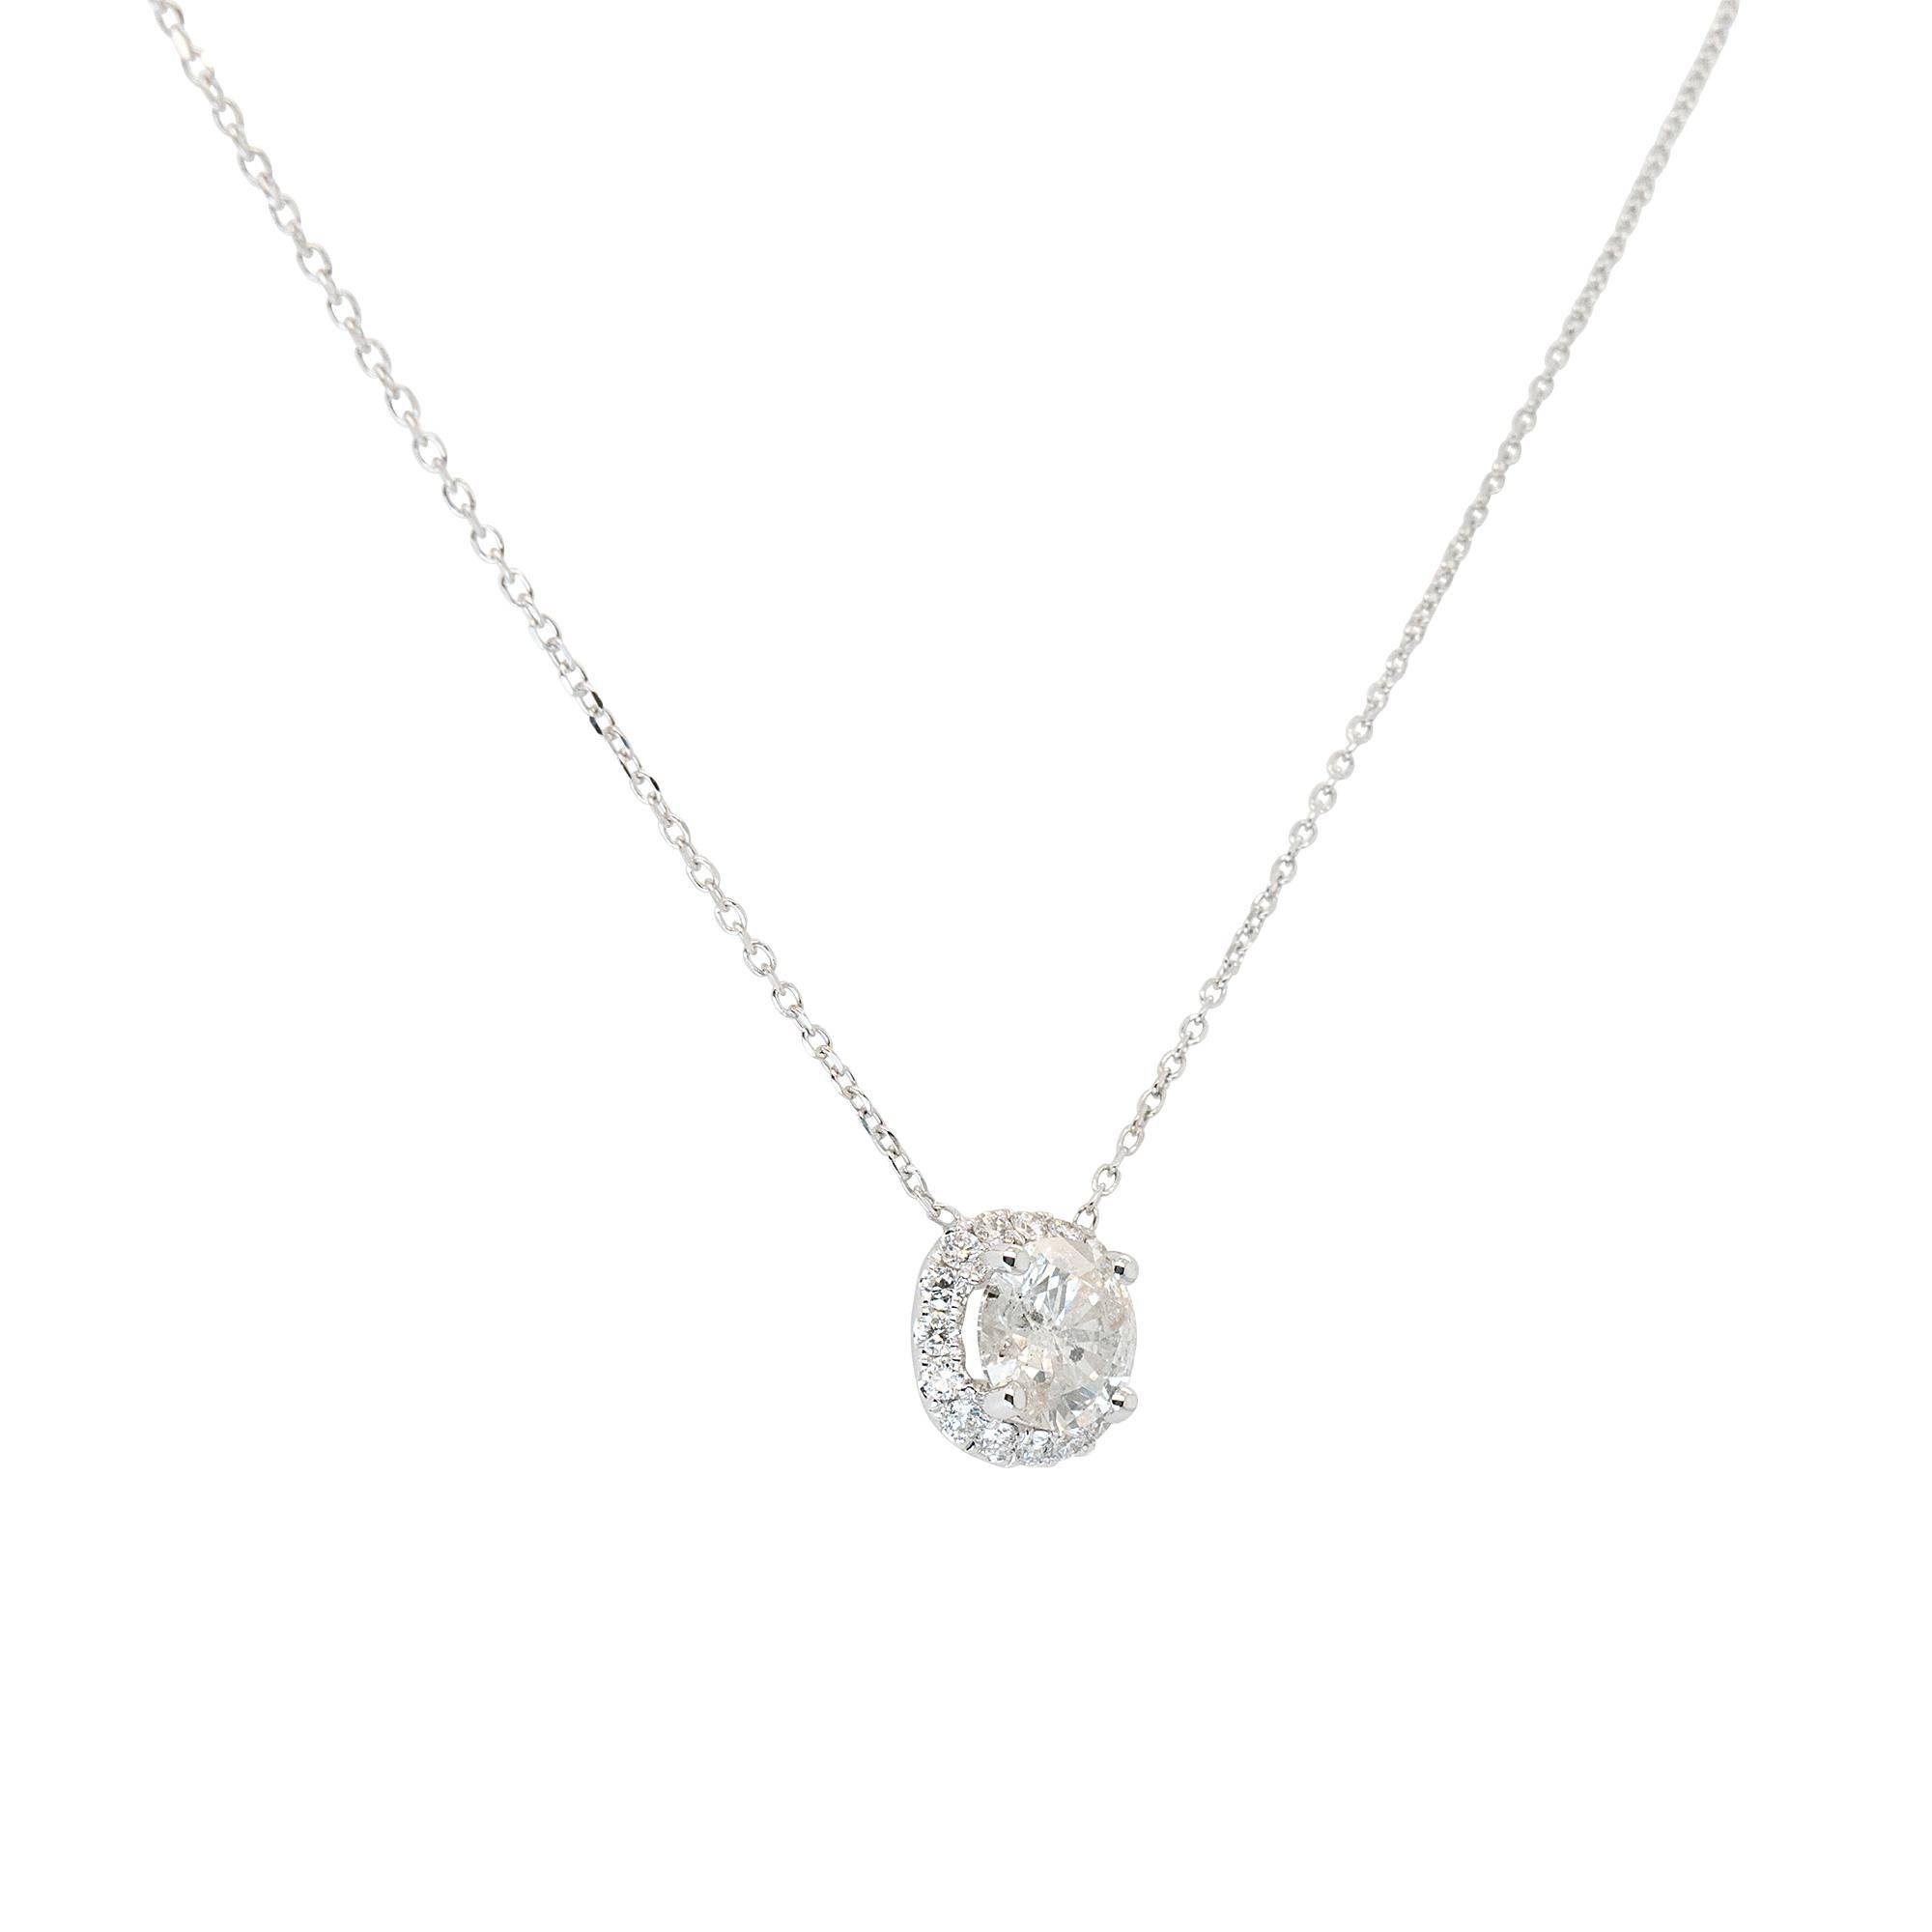 Pendant Details:
1.15ct Round Brilliant Natural Diamonds
In H Color and SI1 Clarity
6.7mm x 9.2mm x 4.3mm
Chain Details: 14k White Gold Fine Cable Chain
Chain Size: 18